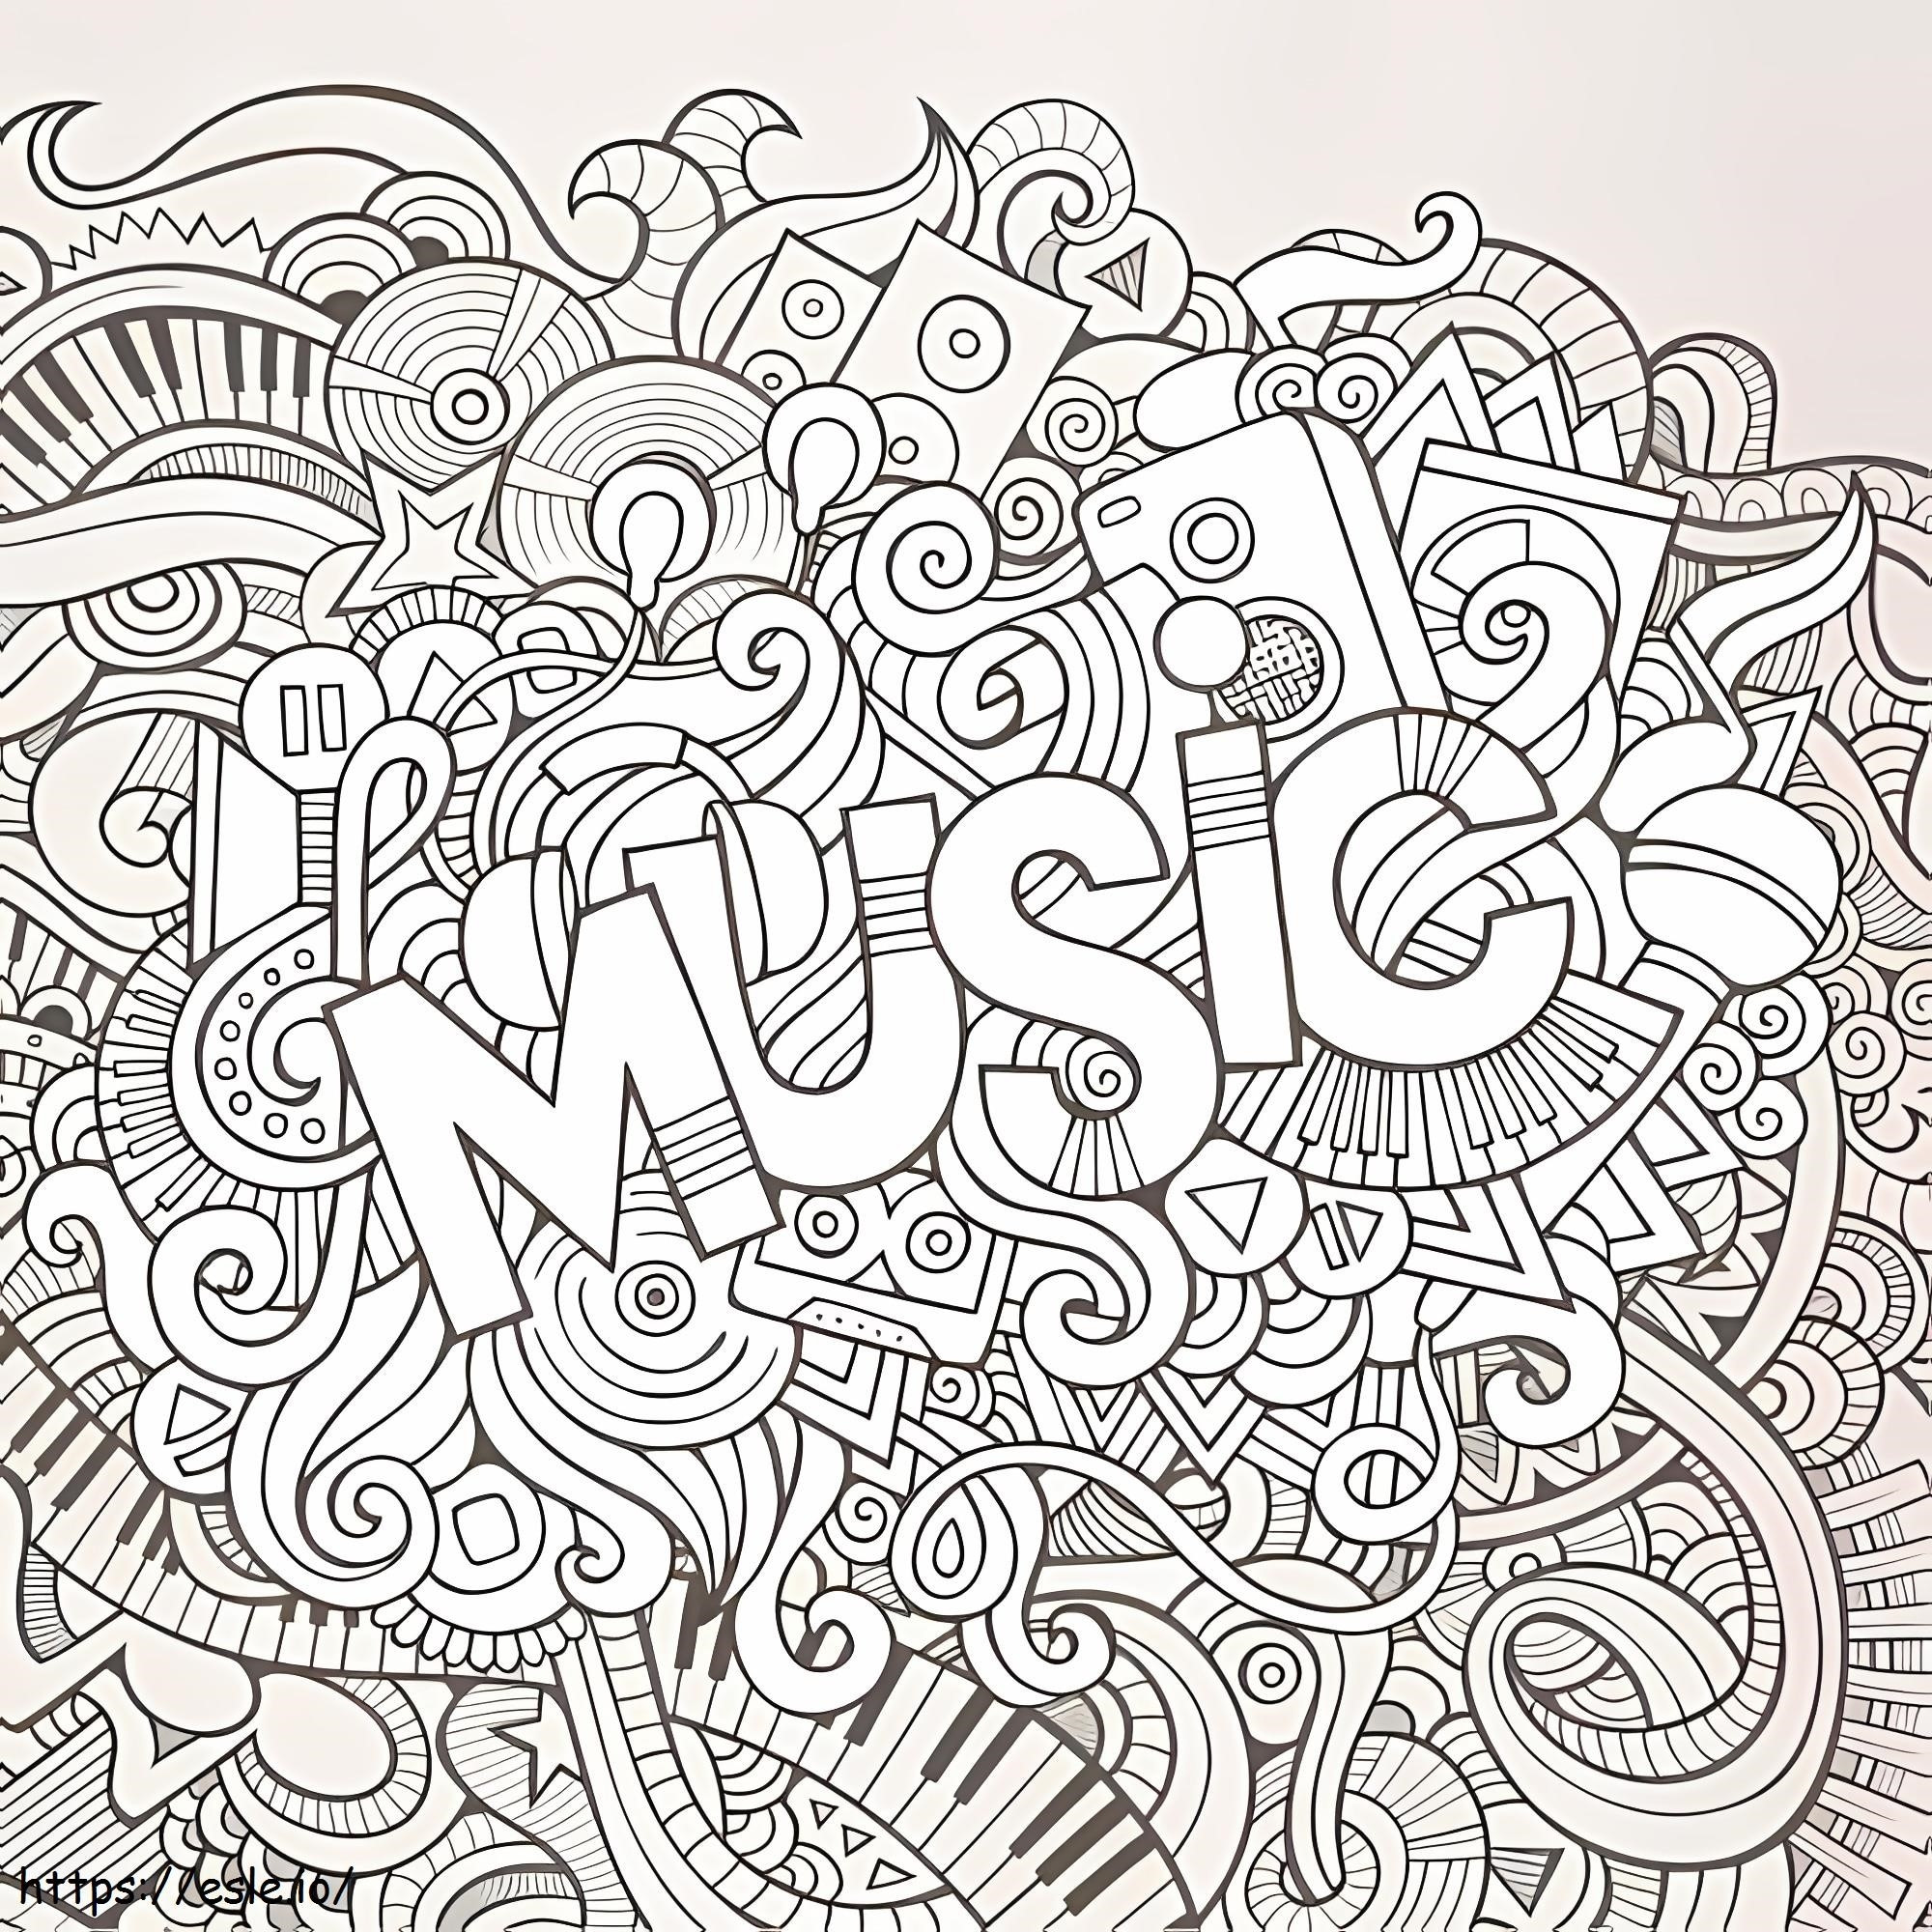 1528509932 Music Coloring Book Nice Music Coloring Book coloring page